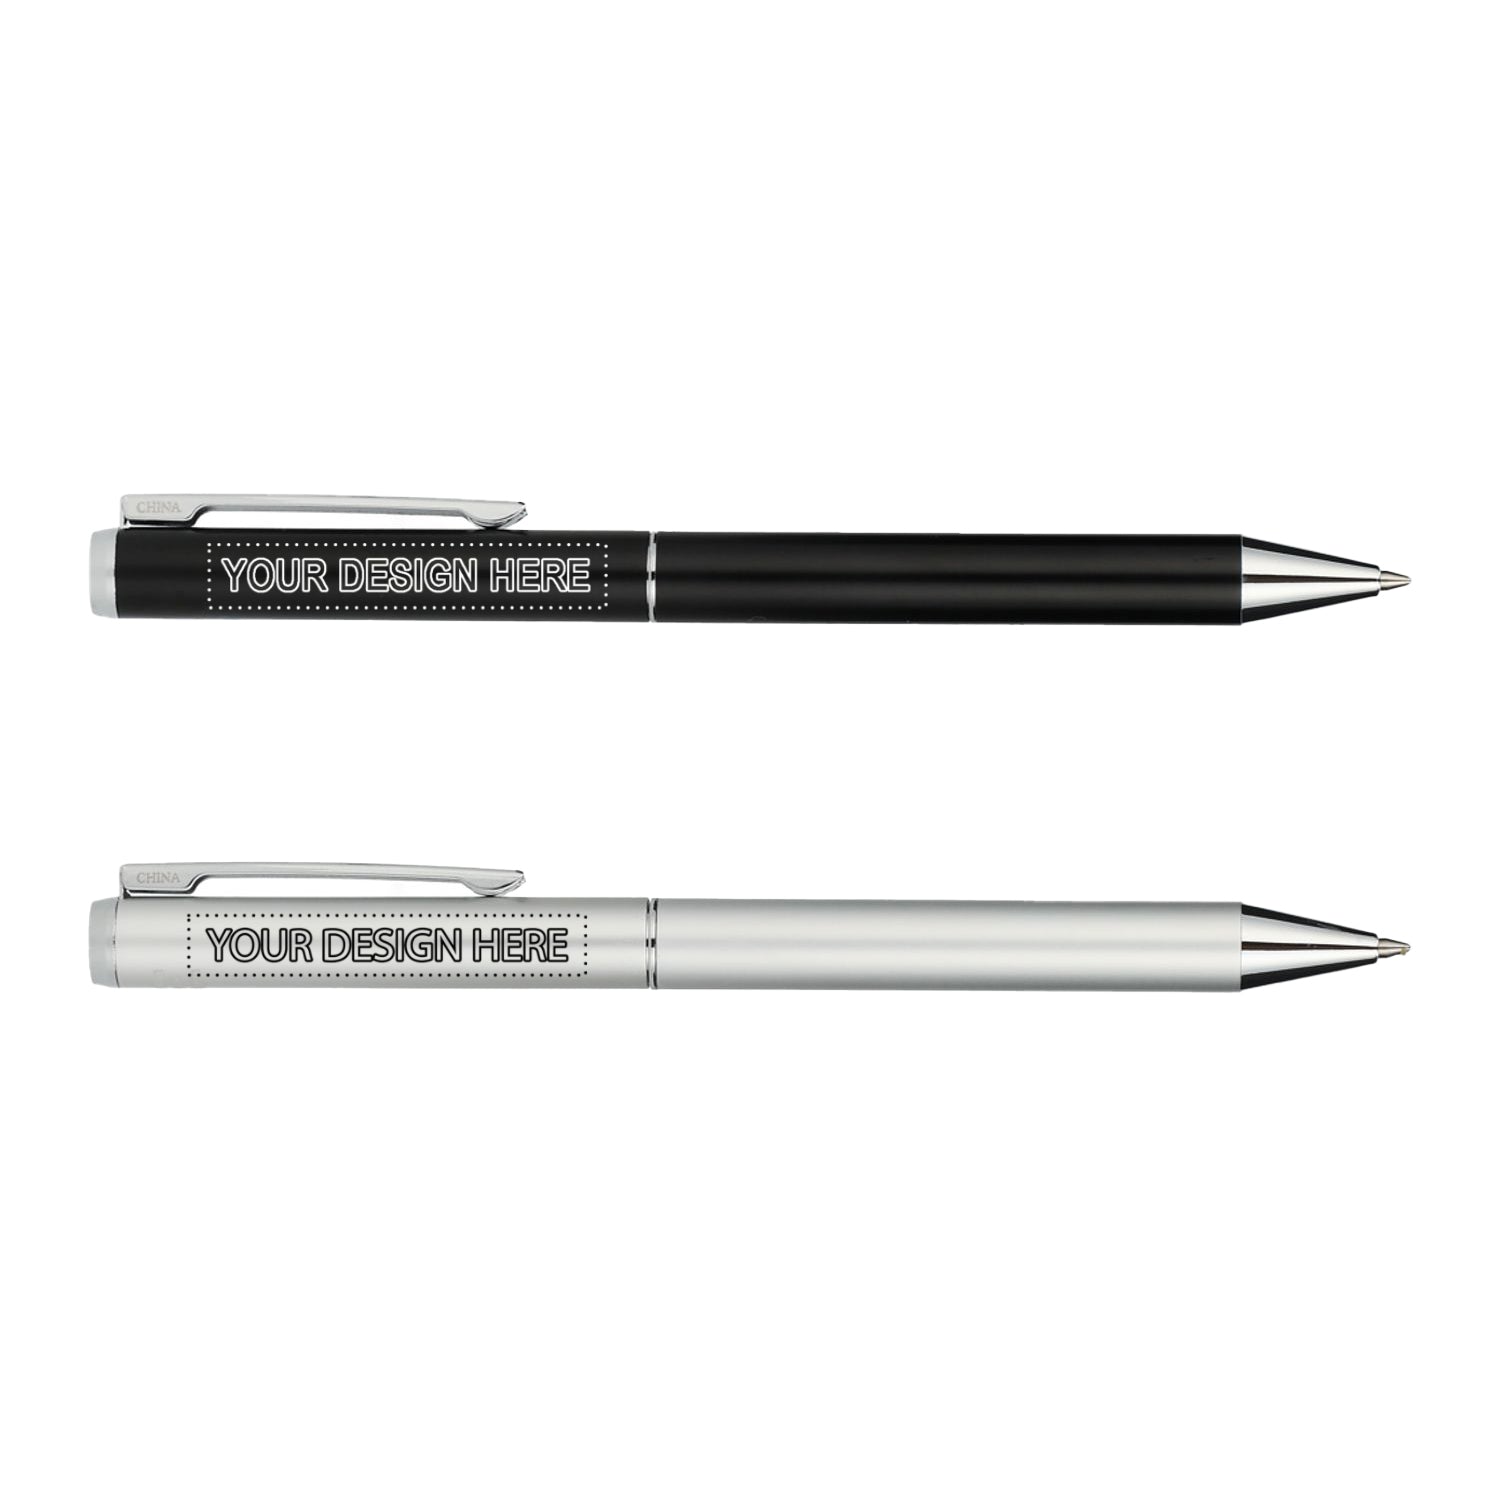 Customized recycled aluminum ultra gel ballpoint pen in silver and black.